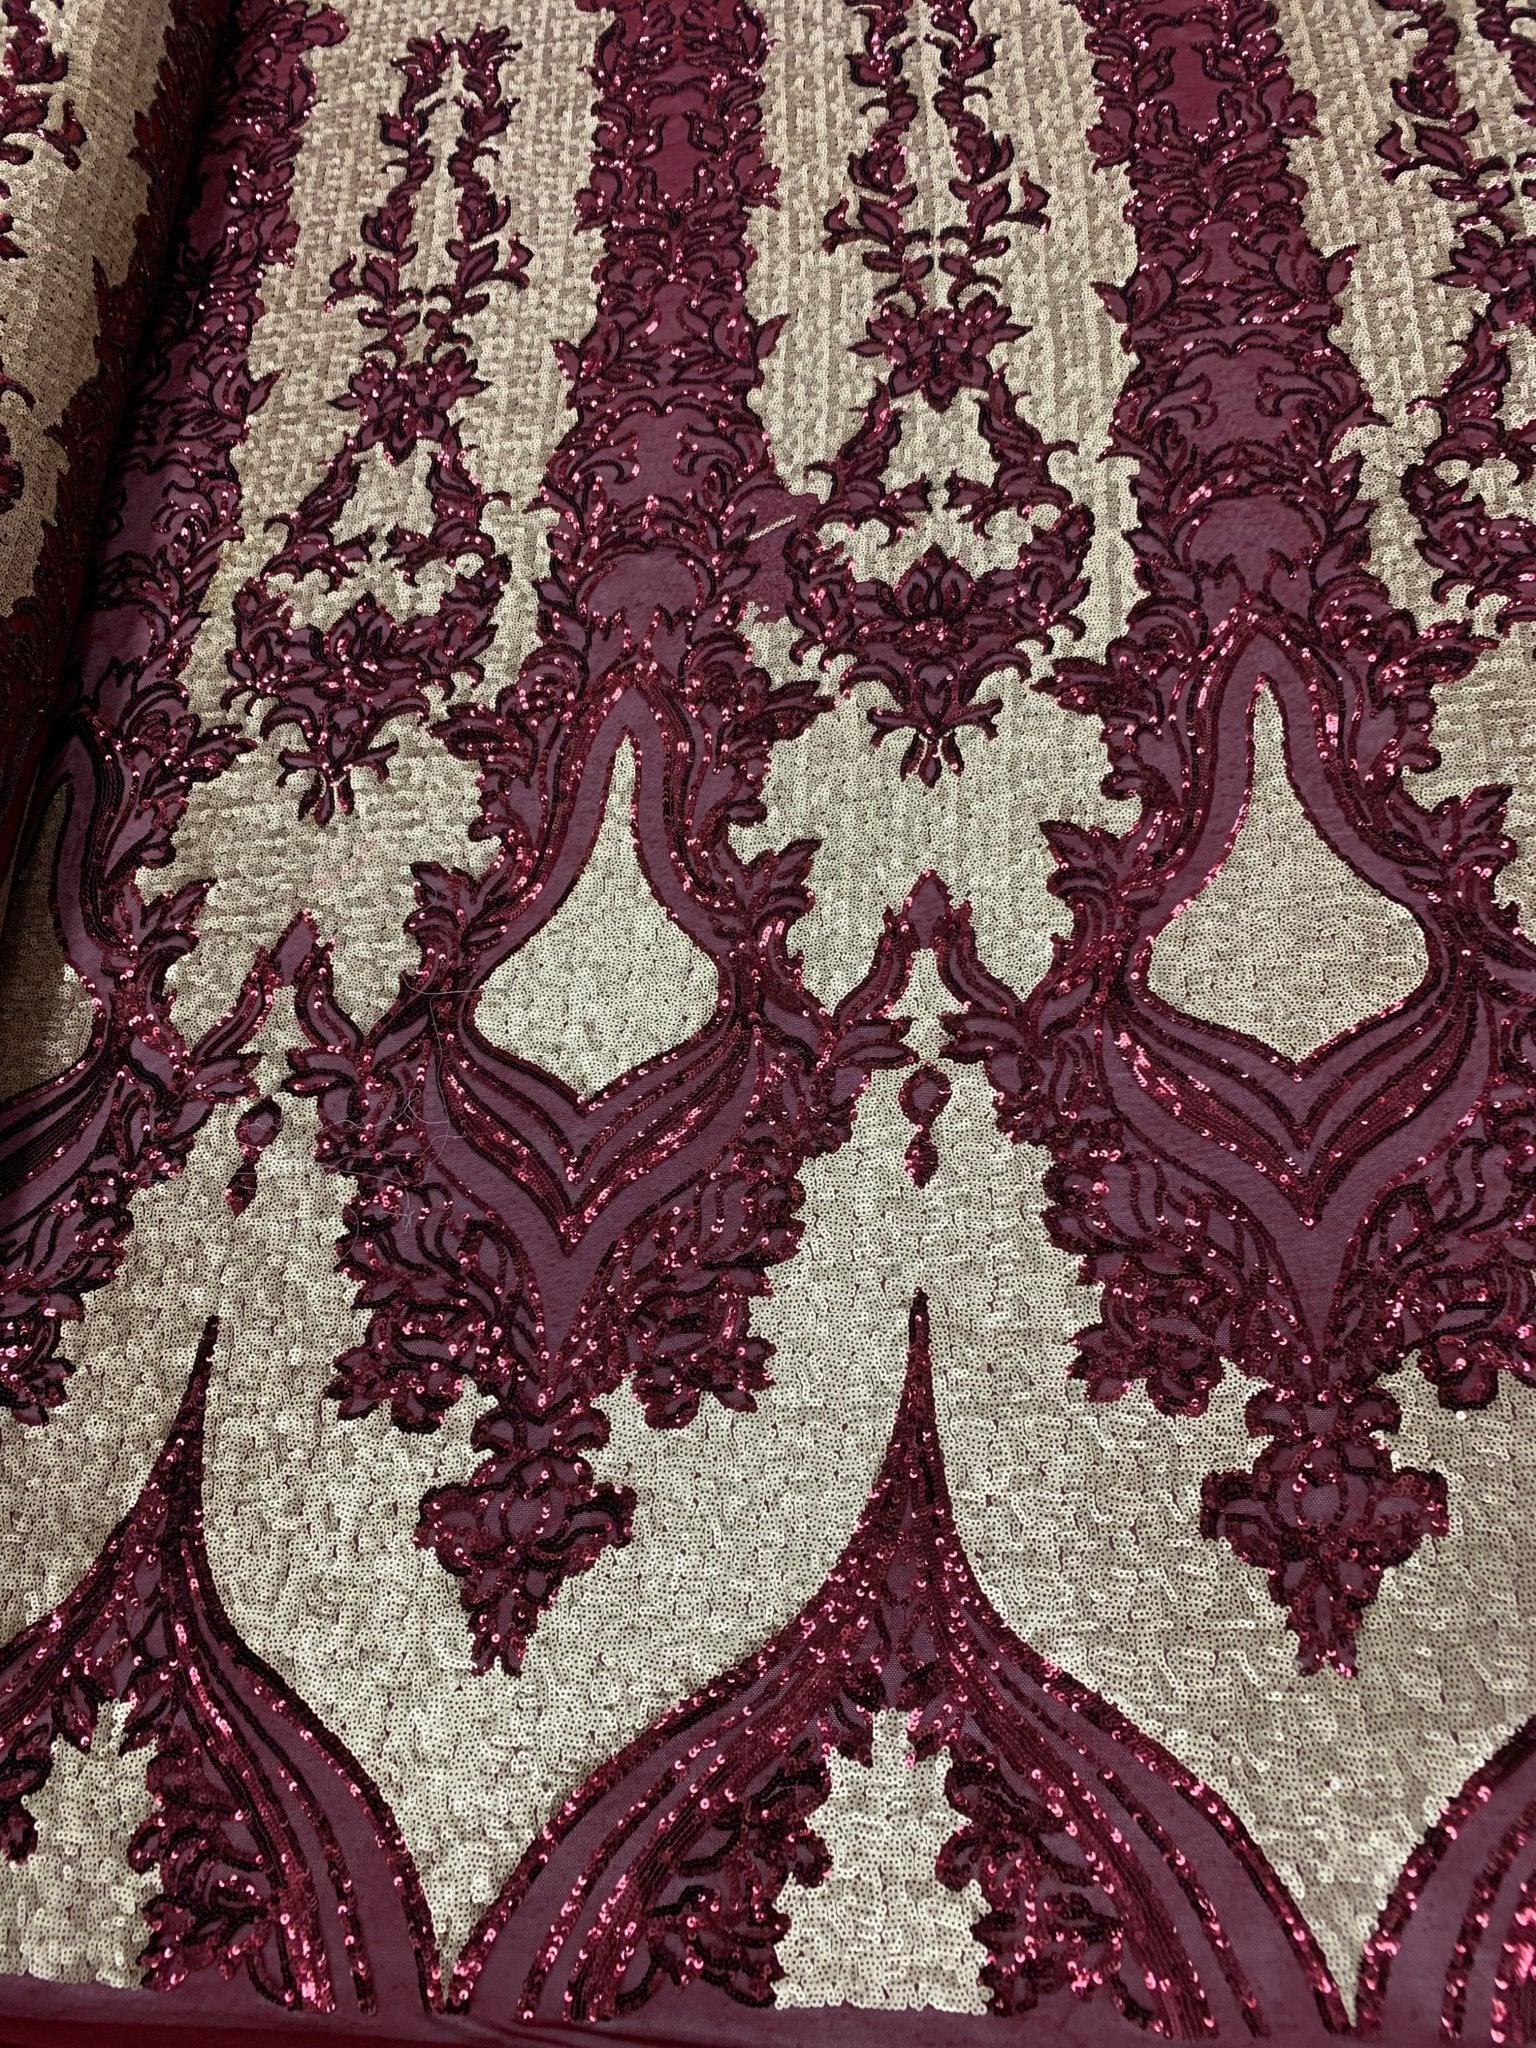 Burgundy_ Elegant 4 WAY Stretch Sequins On Power Mesh//Spandex Mesh Lace Sequins Fabric By The Yard//Embroidery Lace/ Gowns/Veil/ BridalICEFABRICICE FABRICS1/2 Yard (18 inches)Burgundy_ Elegant 4 WAY Stretch Sequins On Power Mesh//Spandex Mesh Lace Sequins Fabric By The Yard//Embroidery Lace/ Gowns/Veil/ Bridal ICEFABRIC